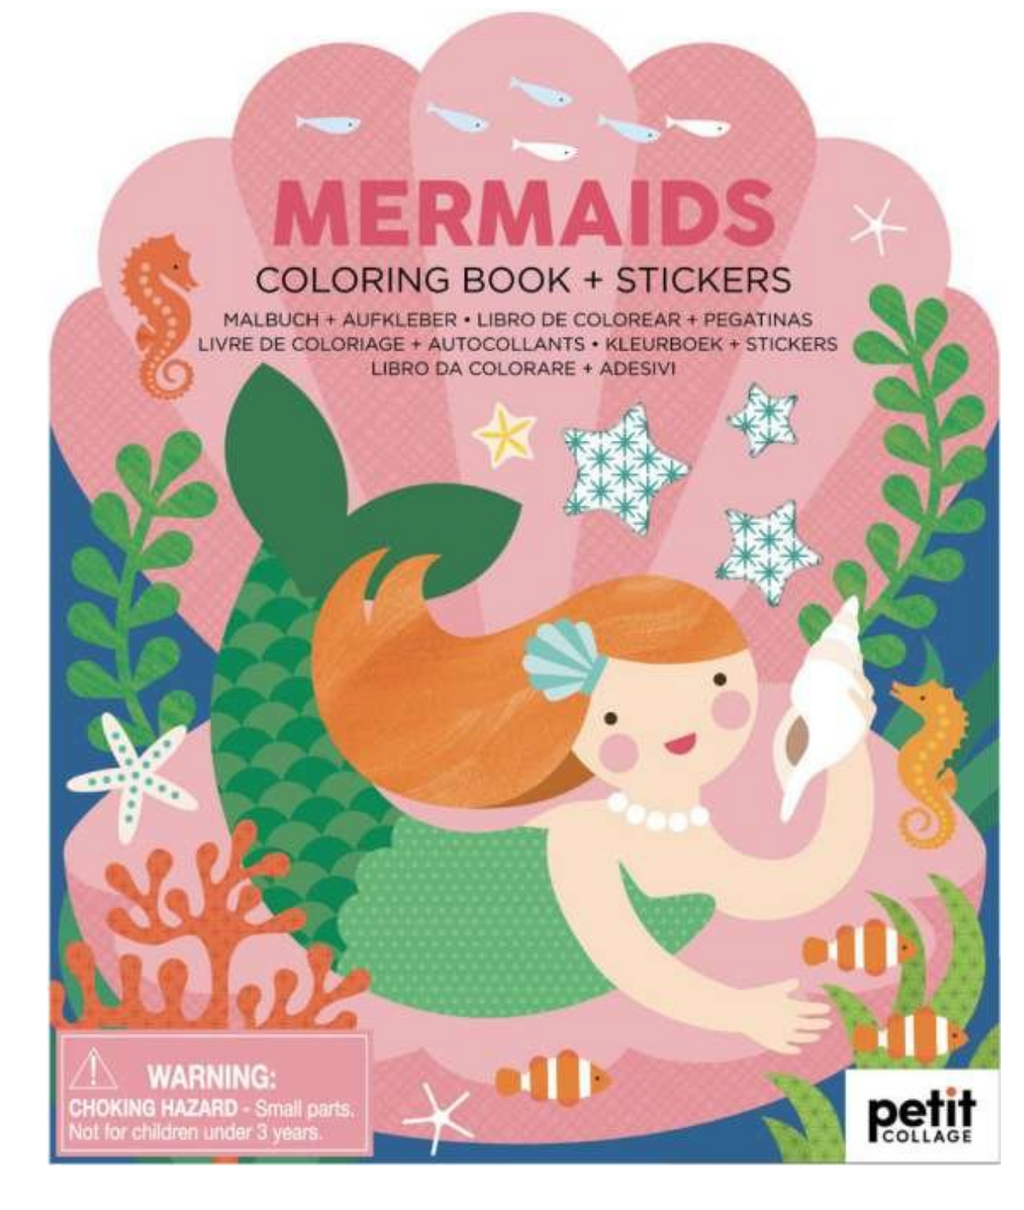 Mermaids Coloring Book with Stickers